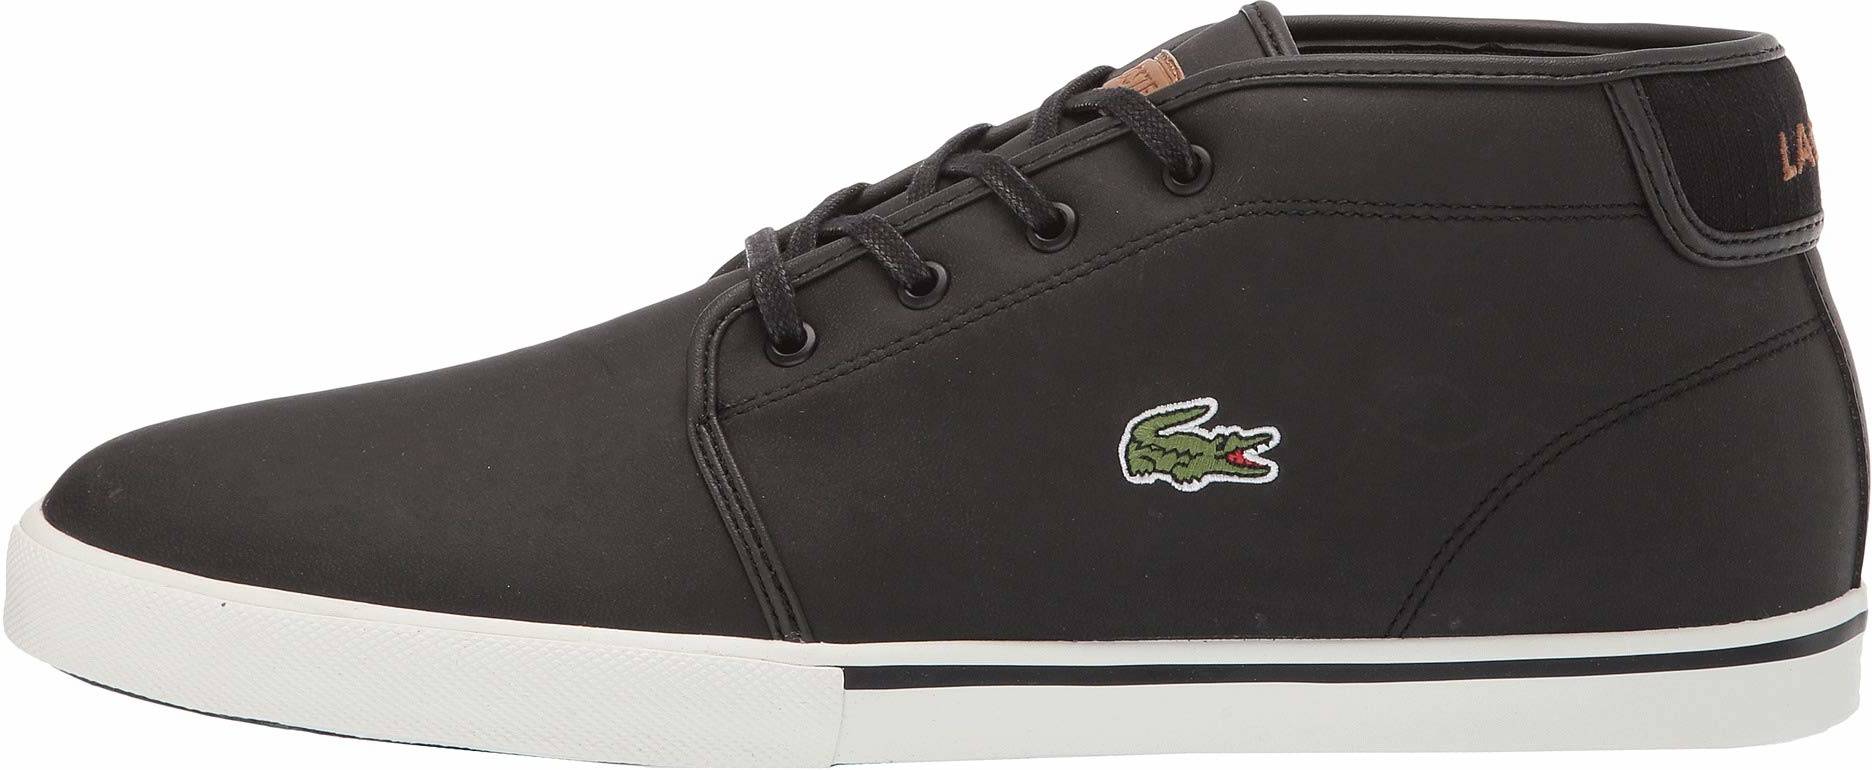 ampthill lacoste